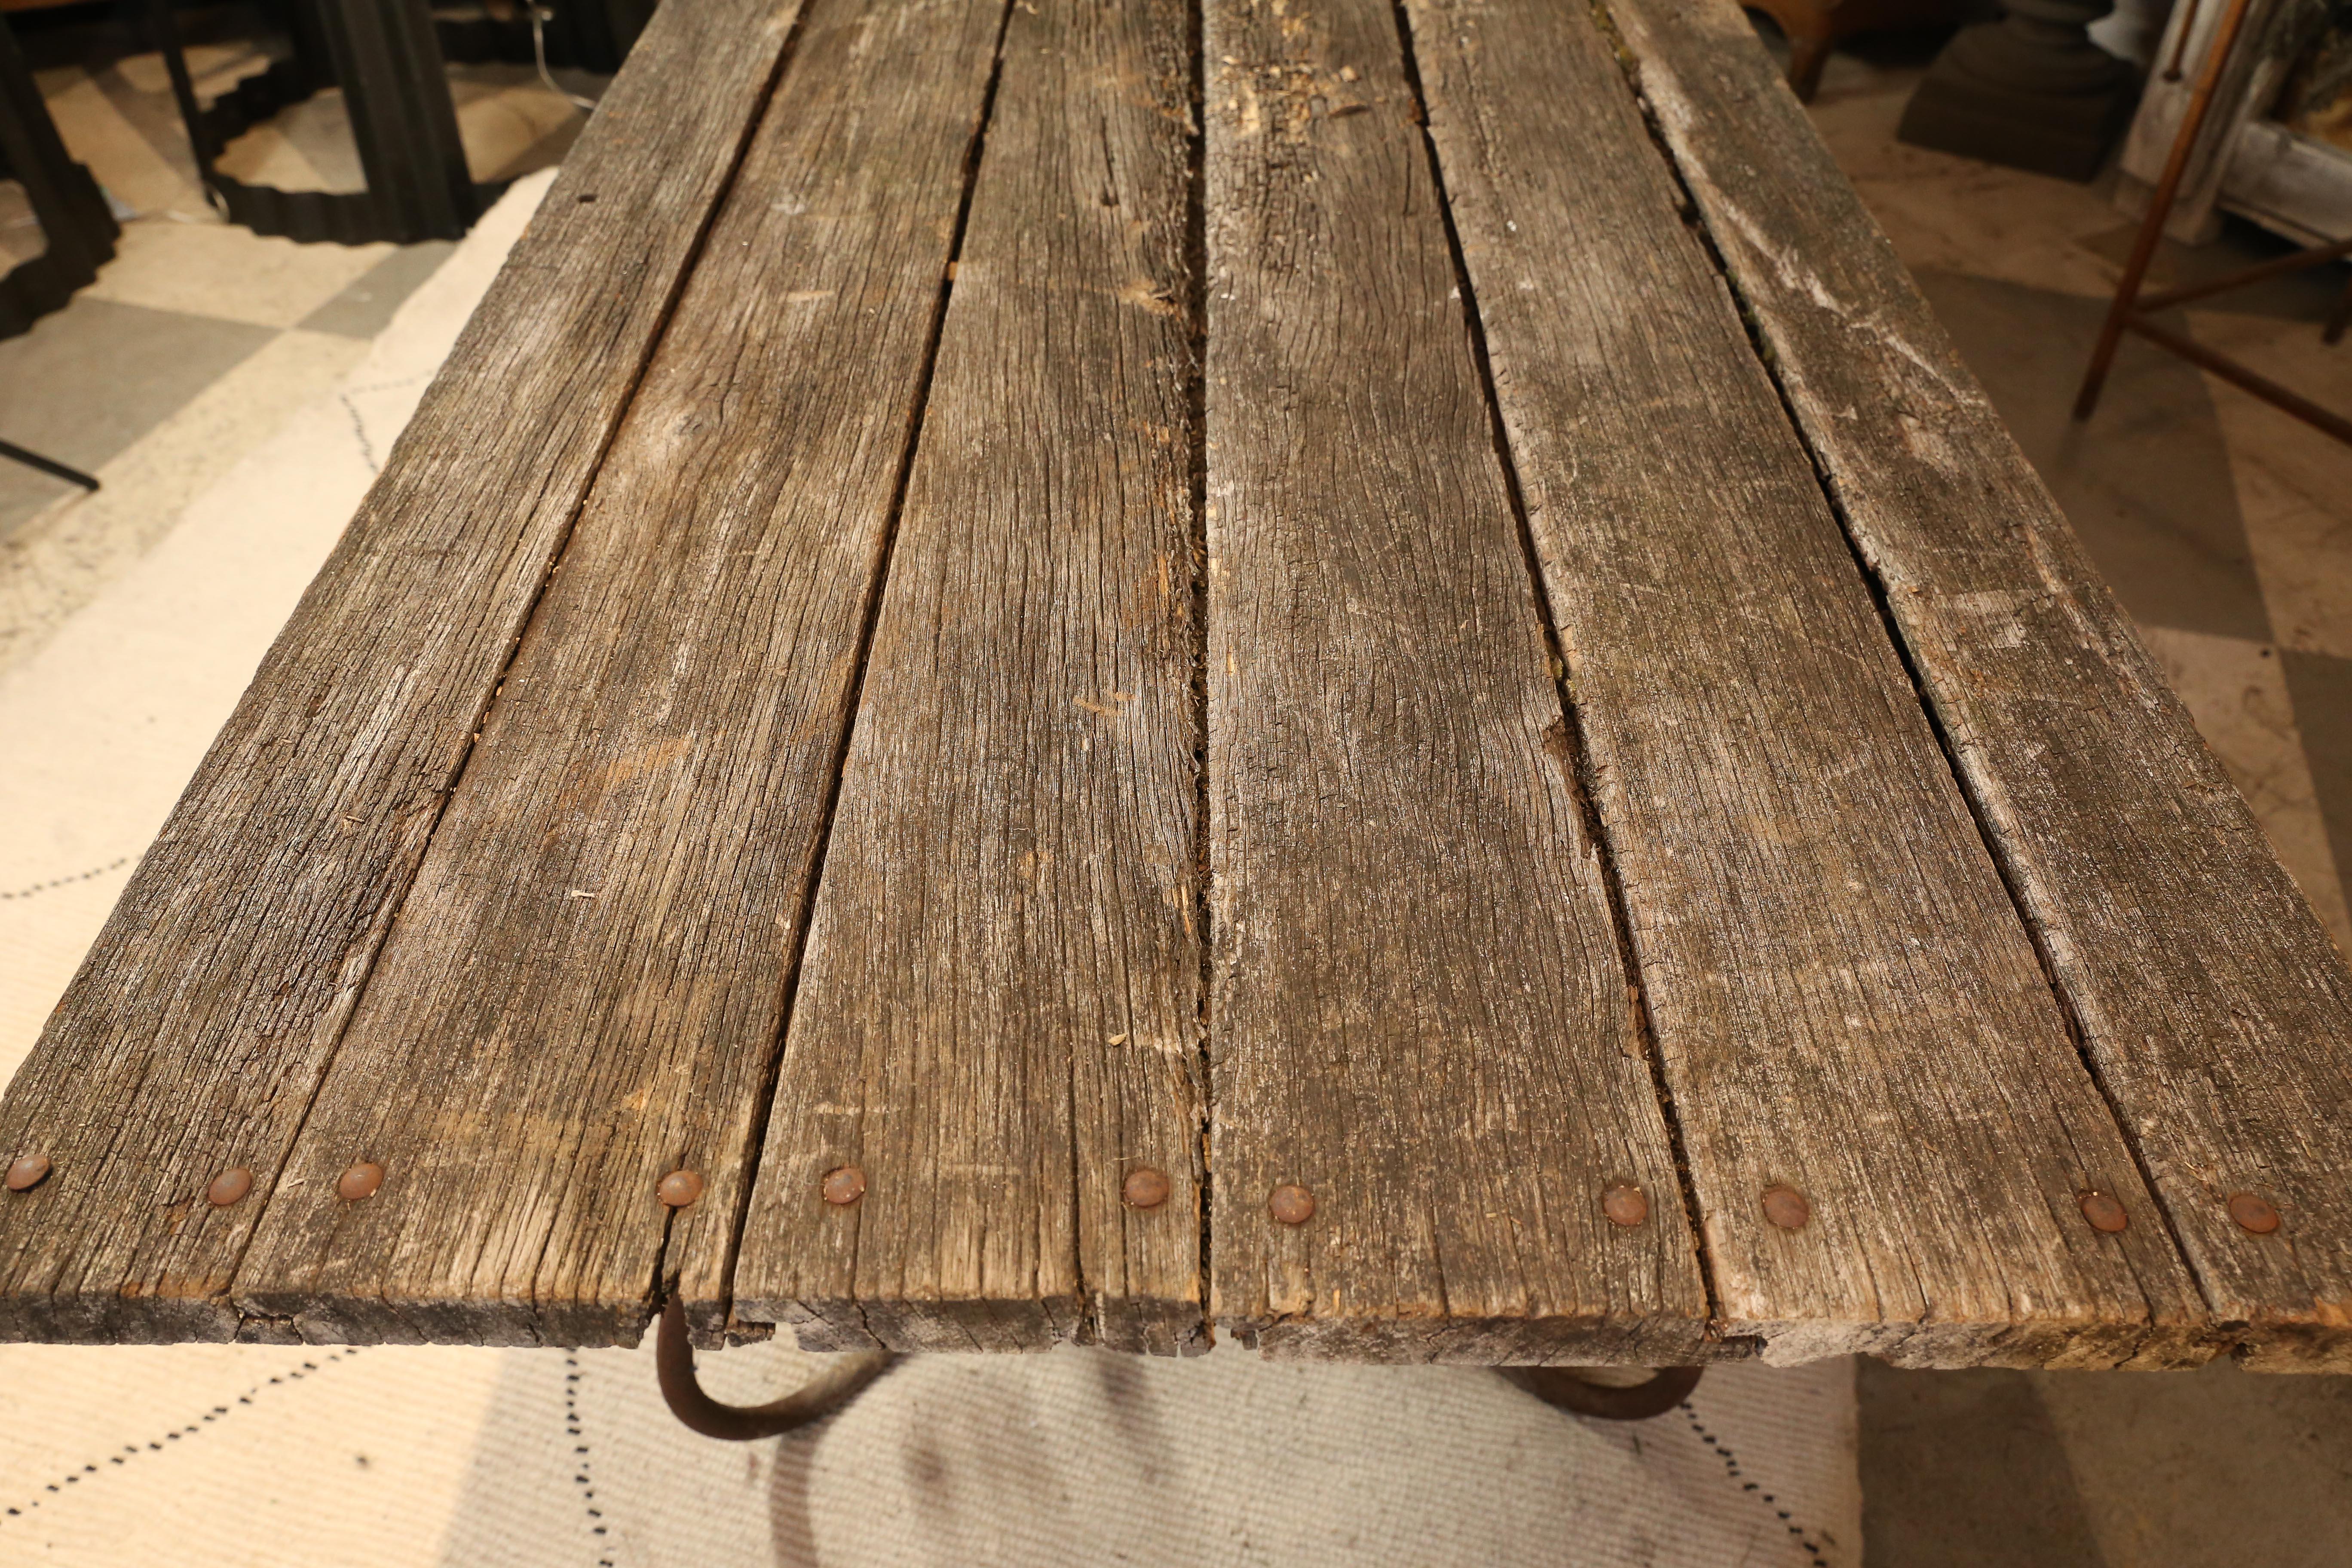 This antique garden table has a solid iron base and lovely distressed, wooden top consistent being in an old French garden where it was discovered. Beautiful and rustic, the handmade base features curved feet and has developed rust throughout, which